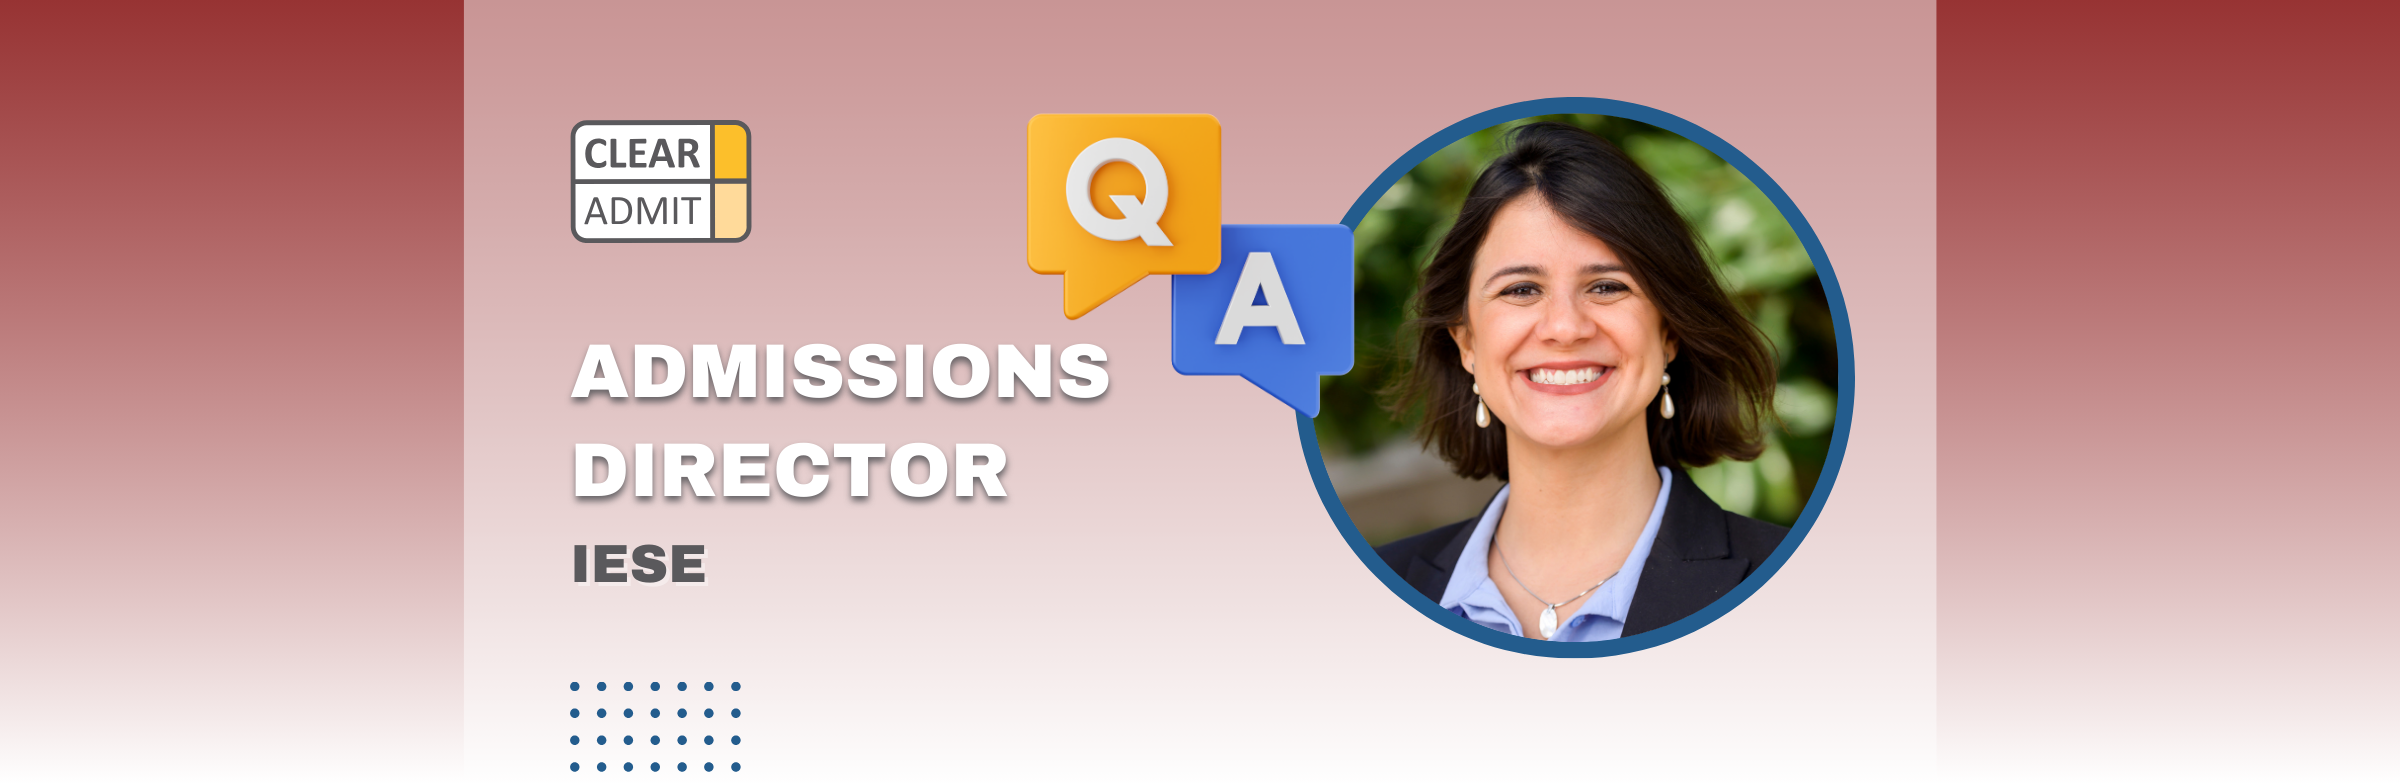 Image for Admissions Director Q&A: Paula Amorim of IESE